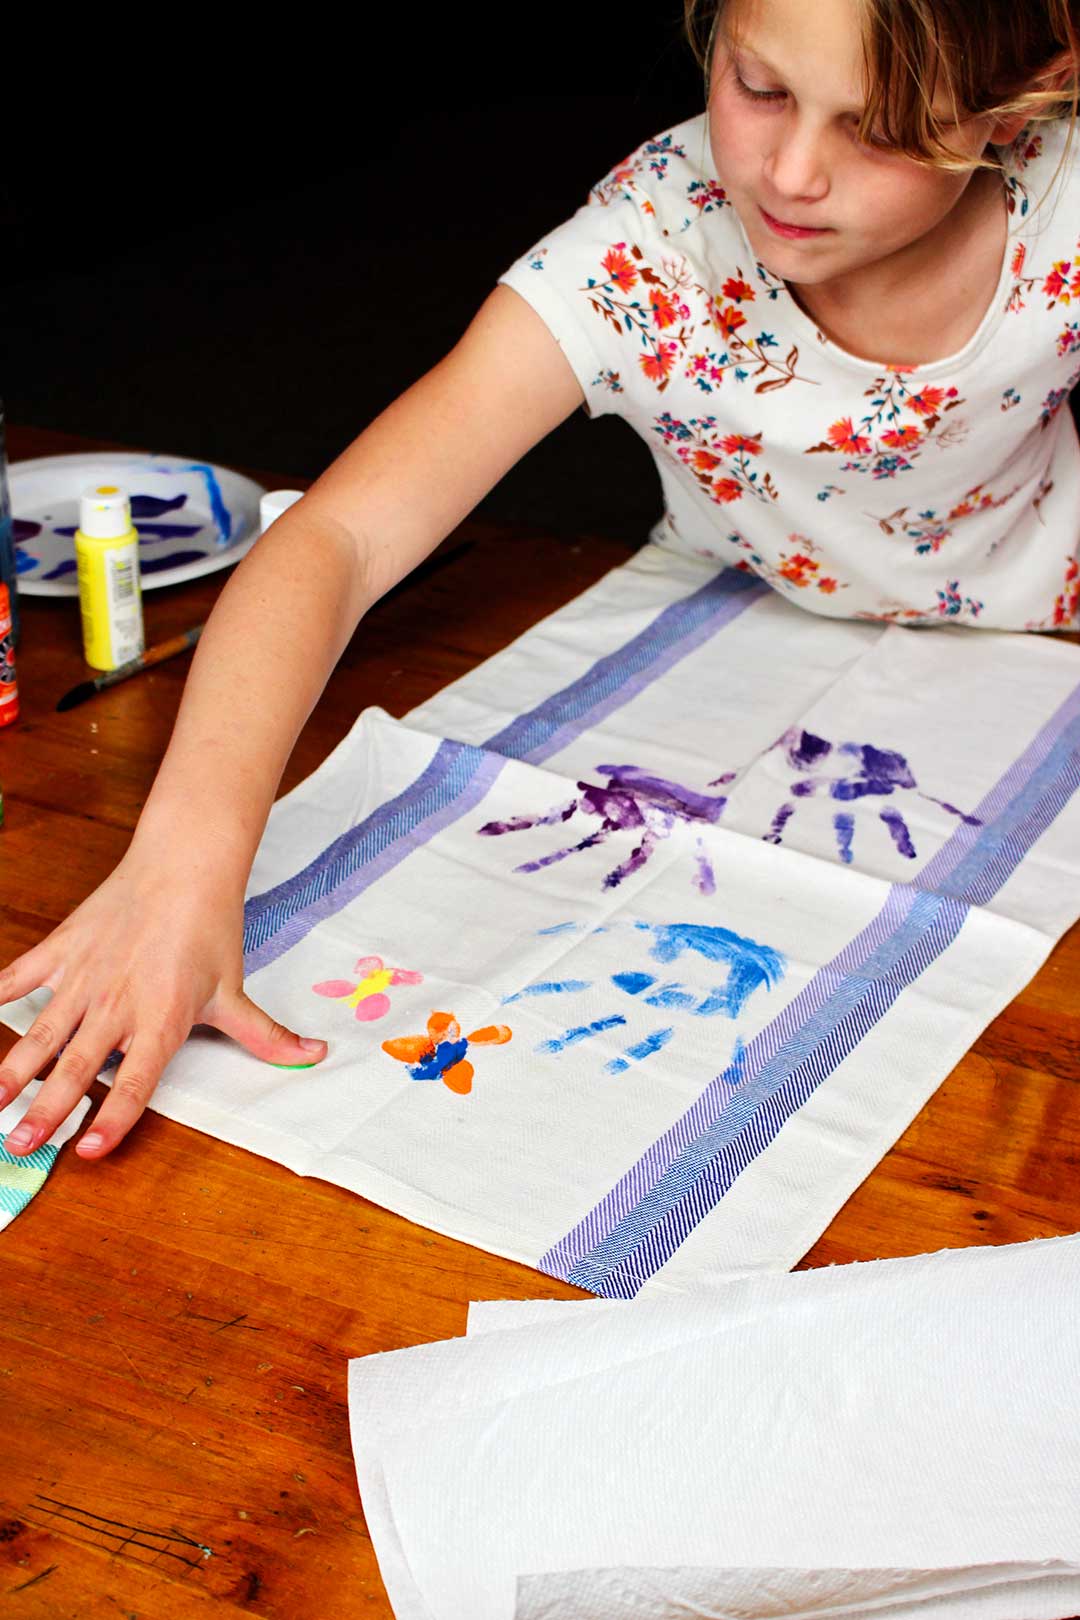 A child leaving a green thumbprint on a painted dish towel with handprints.